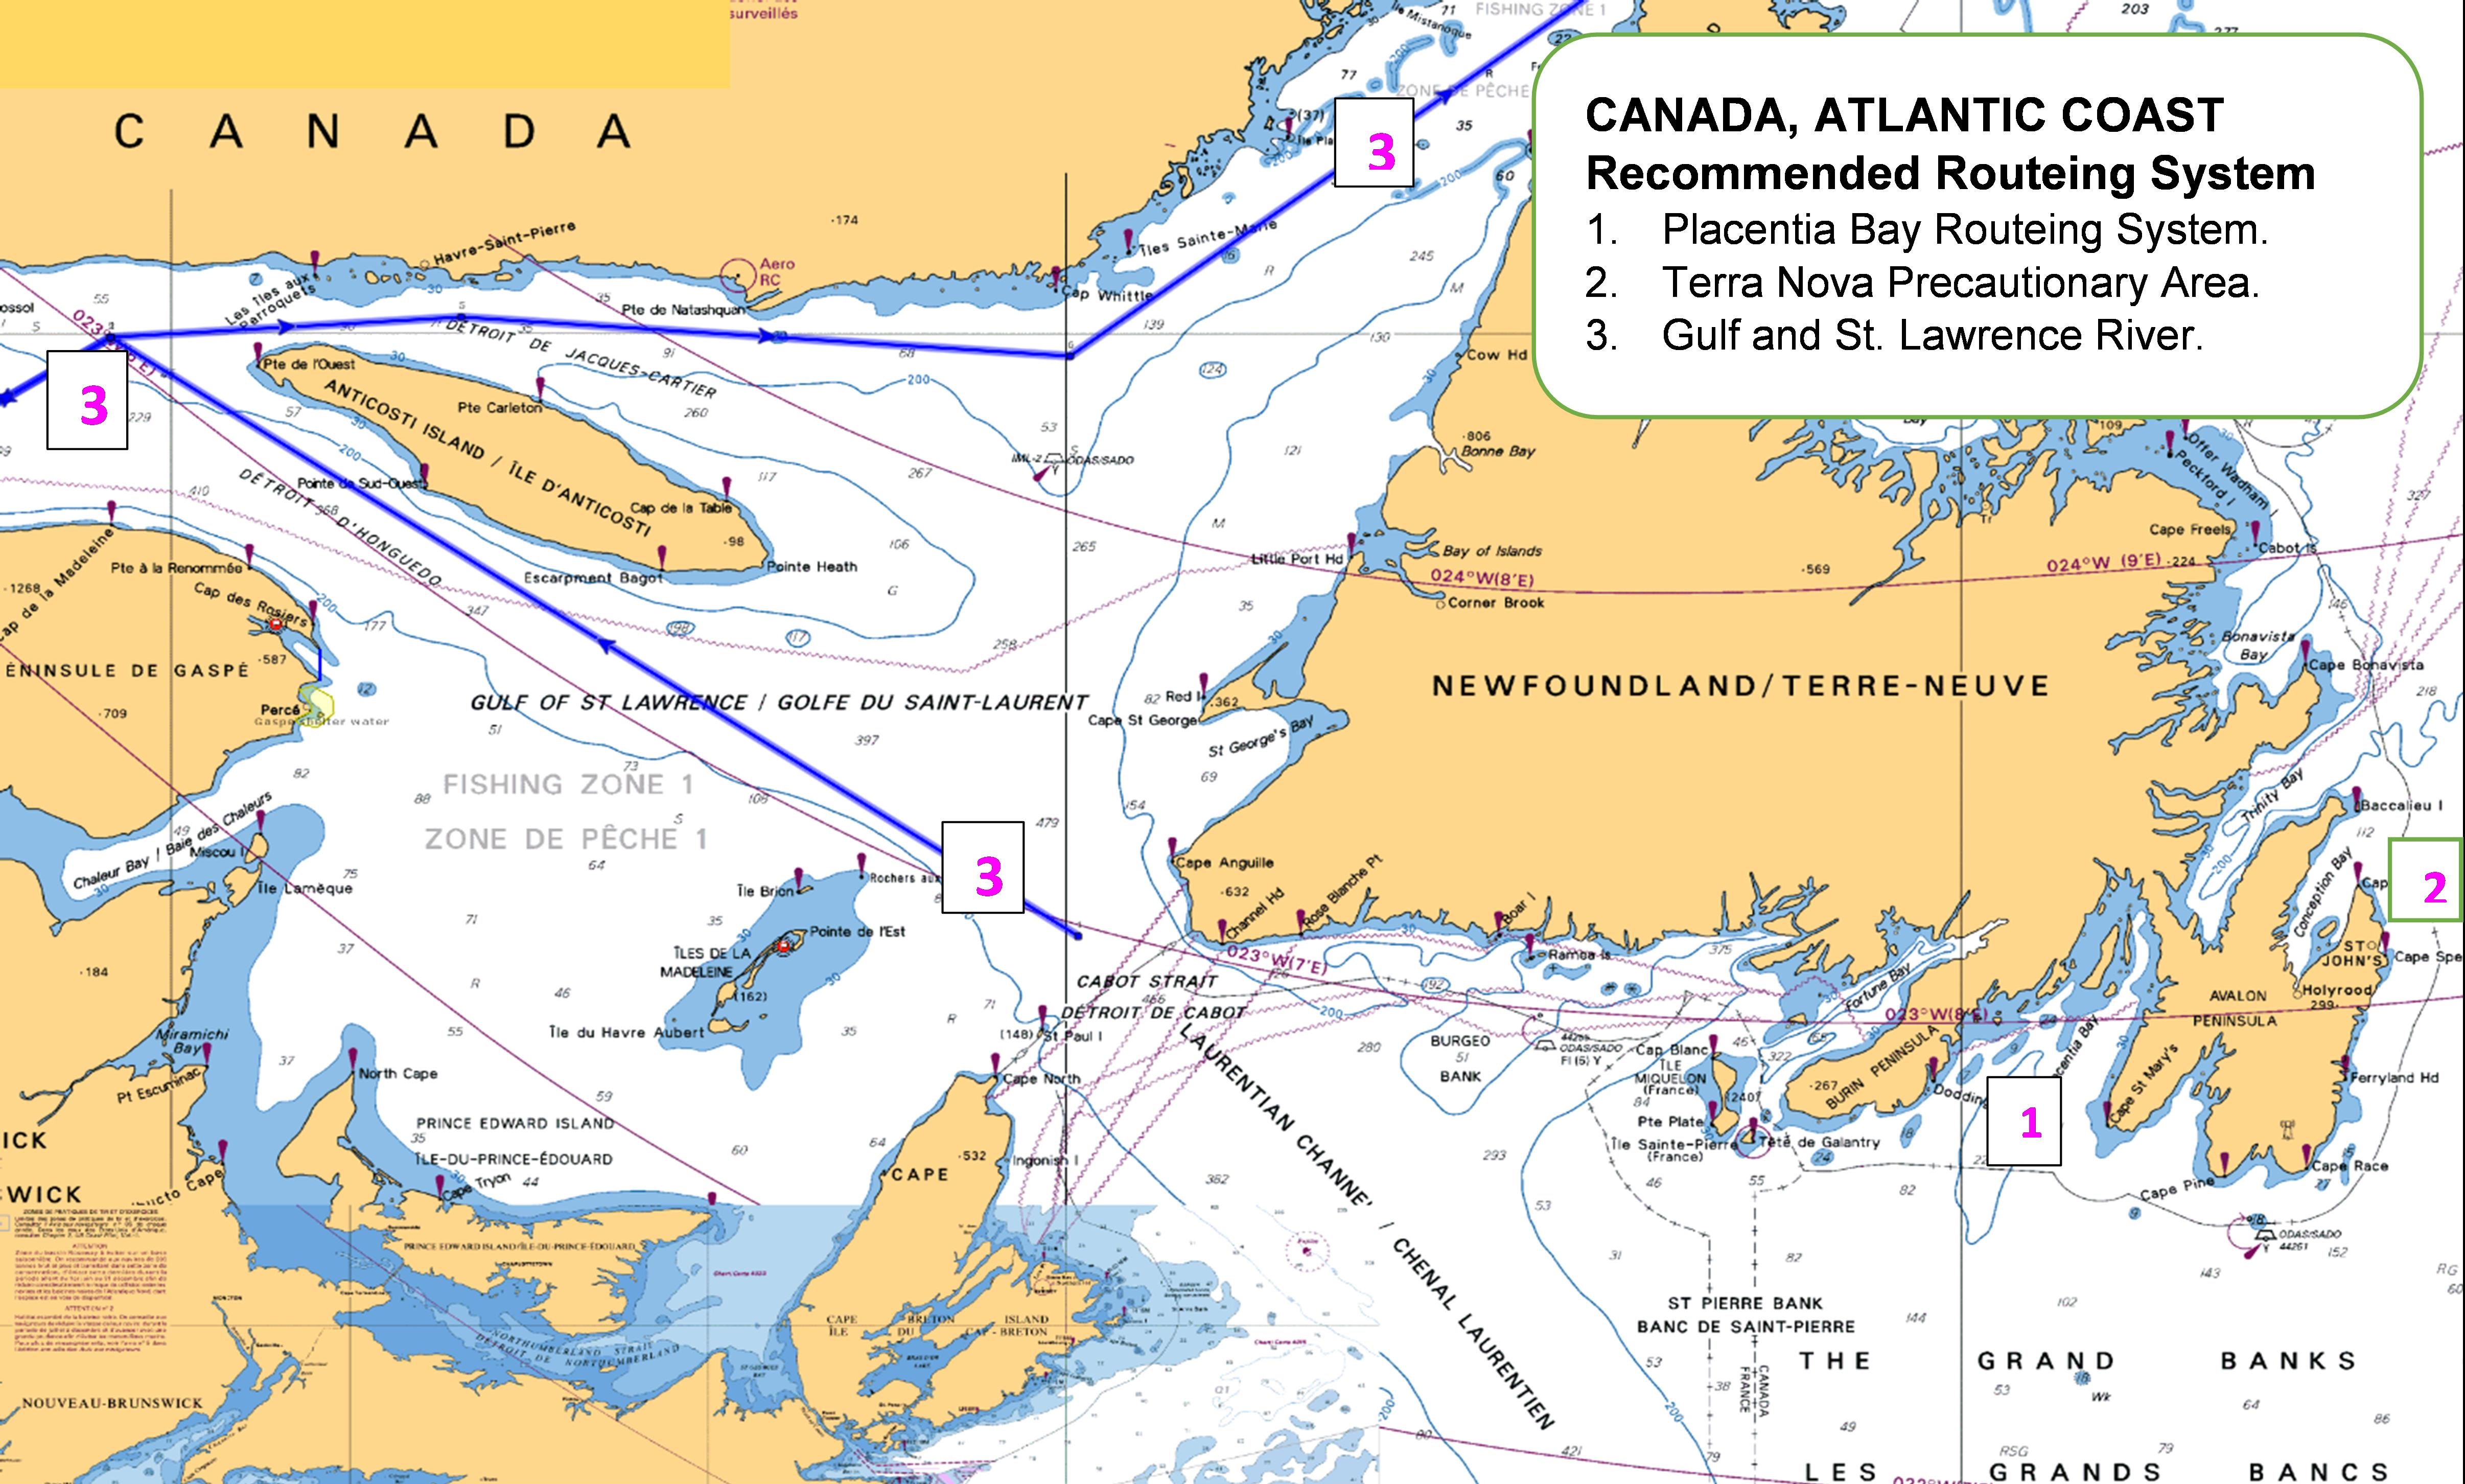 Recommended Canadian Routeing Systems – Atlantic Coast